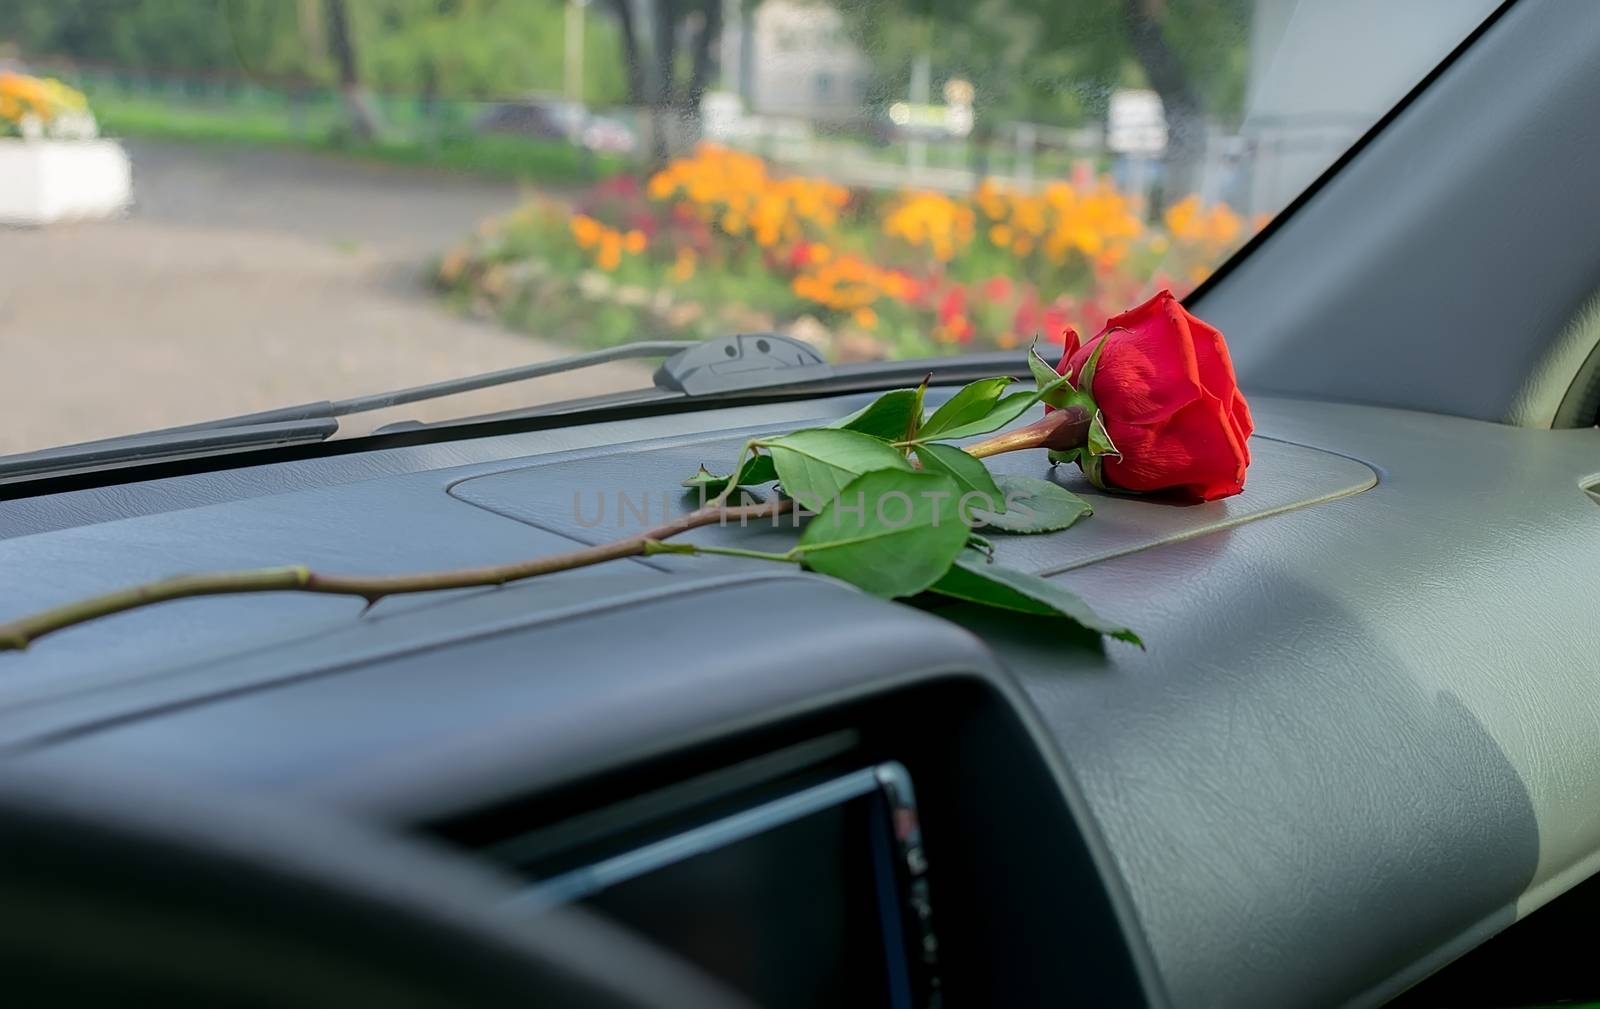 a red rose flower lies on the dashboard inside the car against the background of a city street and flower beds in the Park